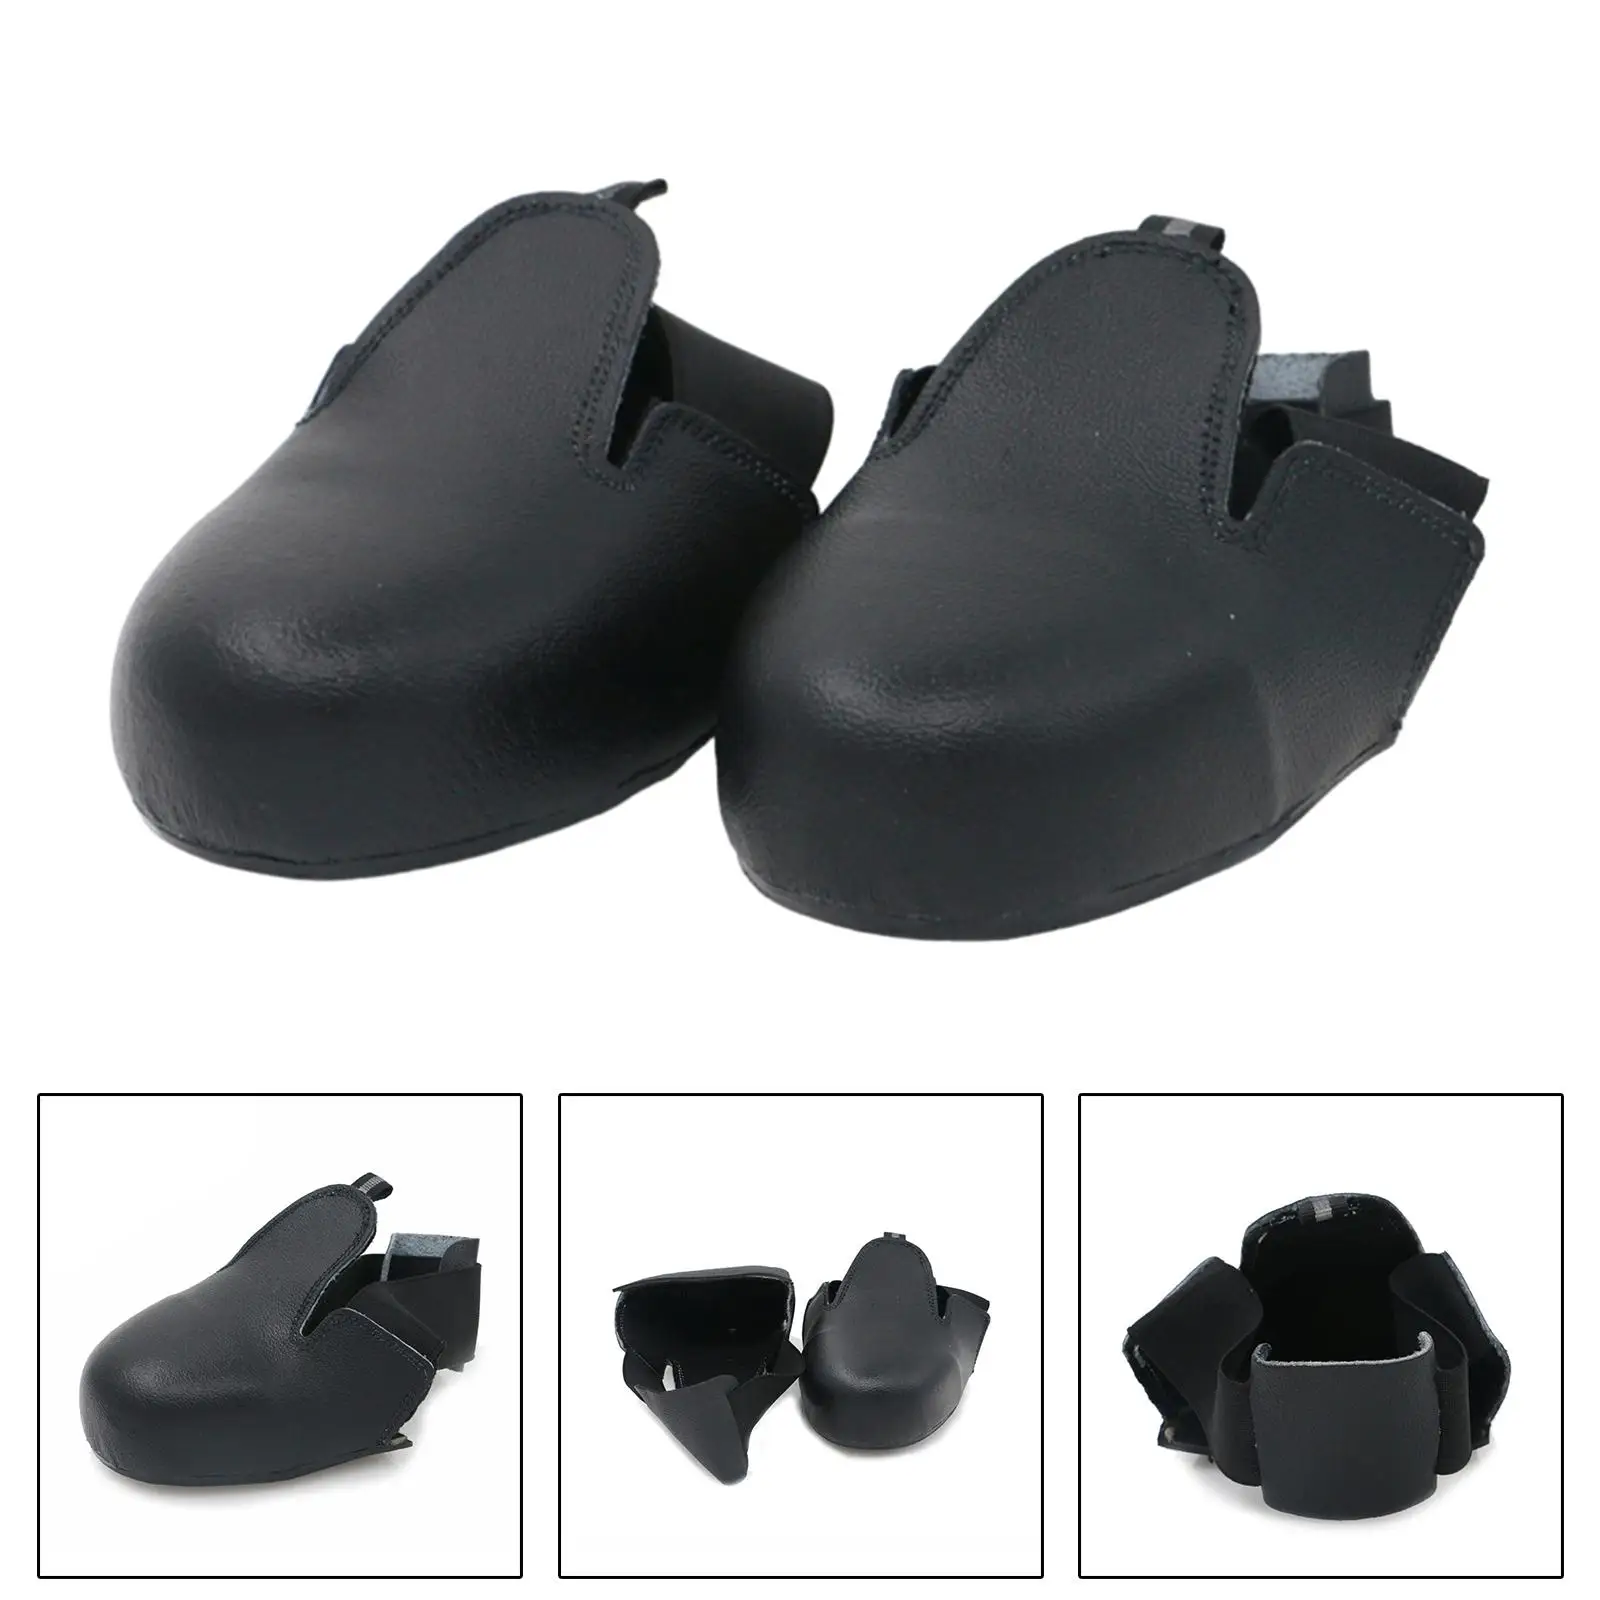 Toe Cap Safety Overshoes Universal Protective Shoe Cover Anti Slip PU Leather Sole Caps for Workplace Toe Cap Safety Shoe Covers